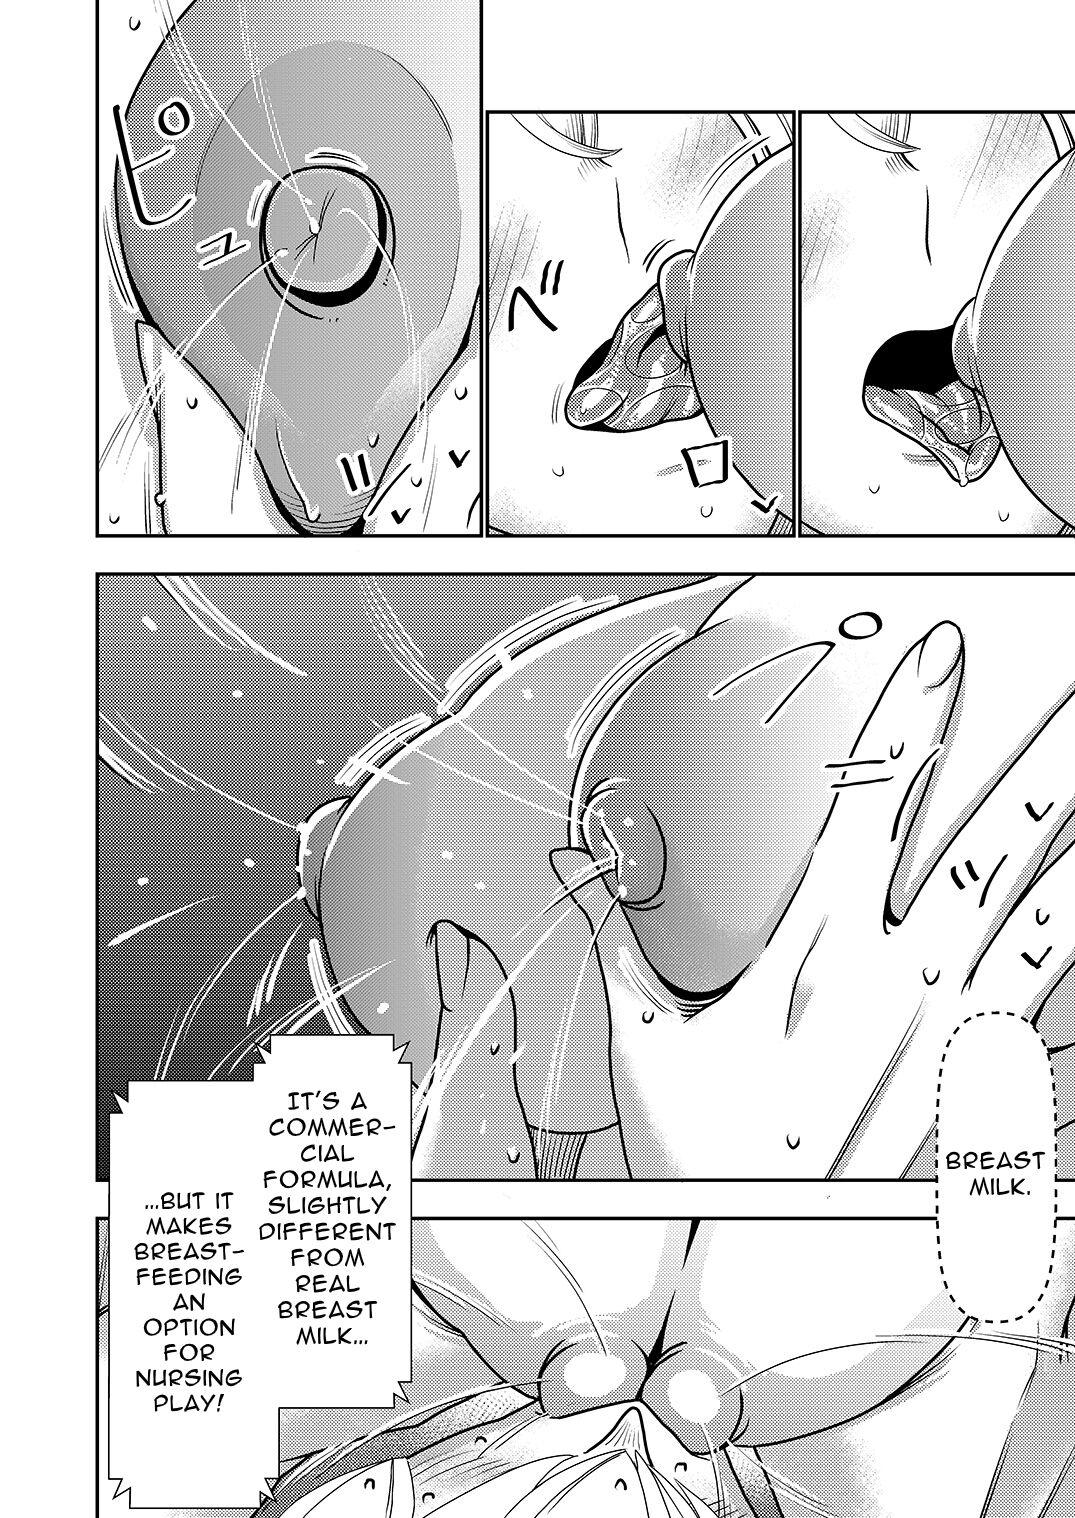 Secret This Defective Sexaroid is TOO LEWD, so I'm thinking of returning it! - Original Putaria - Page 8